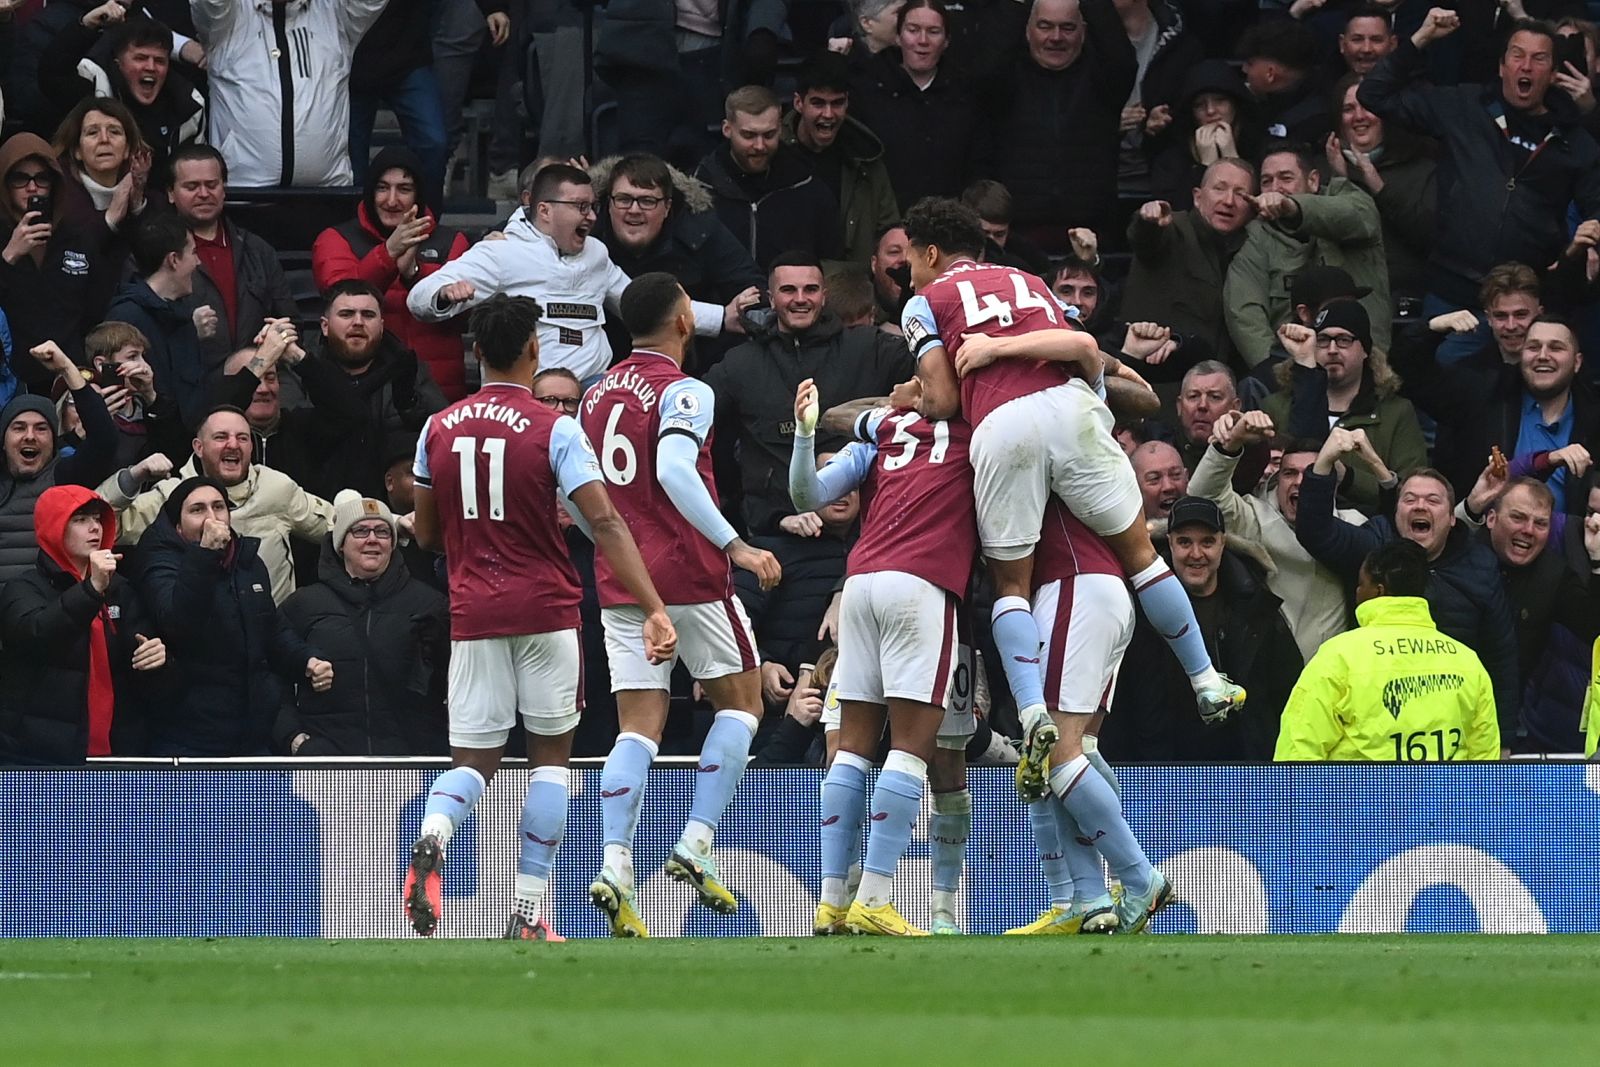 epa10385497 Emiliano Buendia of Villa celebrates with teammates after scoring the opening goal during the English Premier League soccer match between Tottenham Hotspur and Aston Villa in London, Britain, 01 January 2023.  EPA/Neil Hall EDITORIAL USE ONLY. No use with unauthorized audio, video, data, fixture lists, club/league logos or 'live' services. Online in-match use limited to 120 images, no video emulation. No use in betting, games or single club/league/player publications